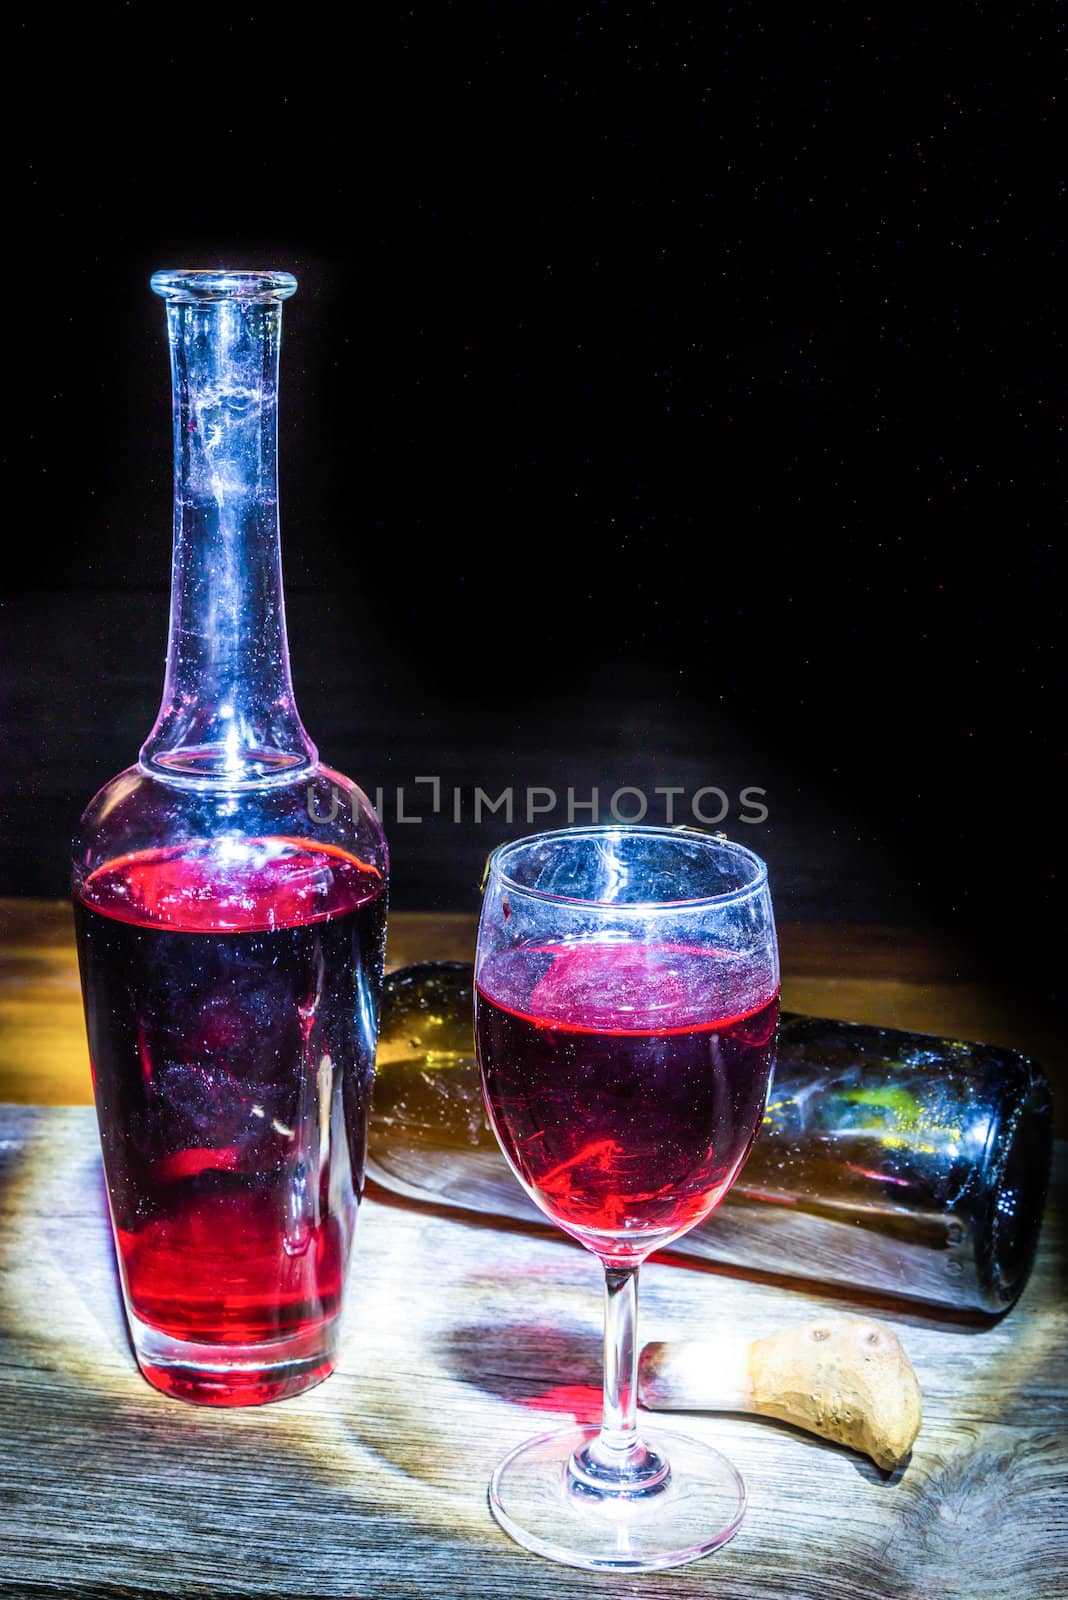 Wine glass and Bottle  by wmitrmatr